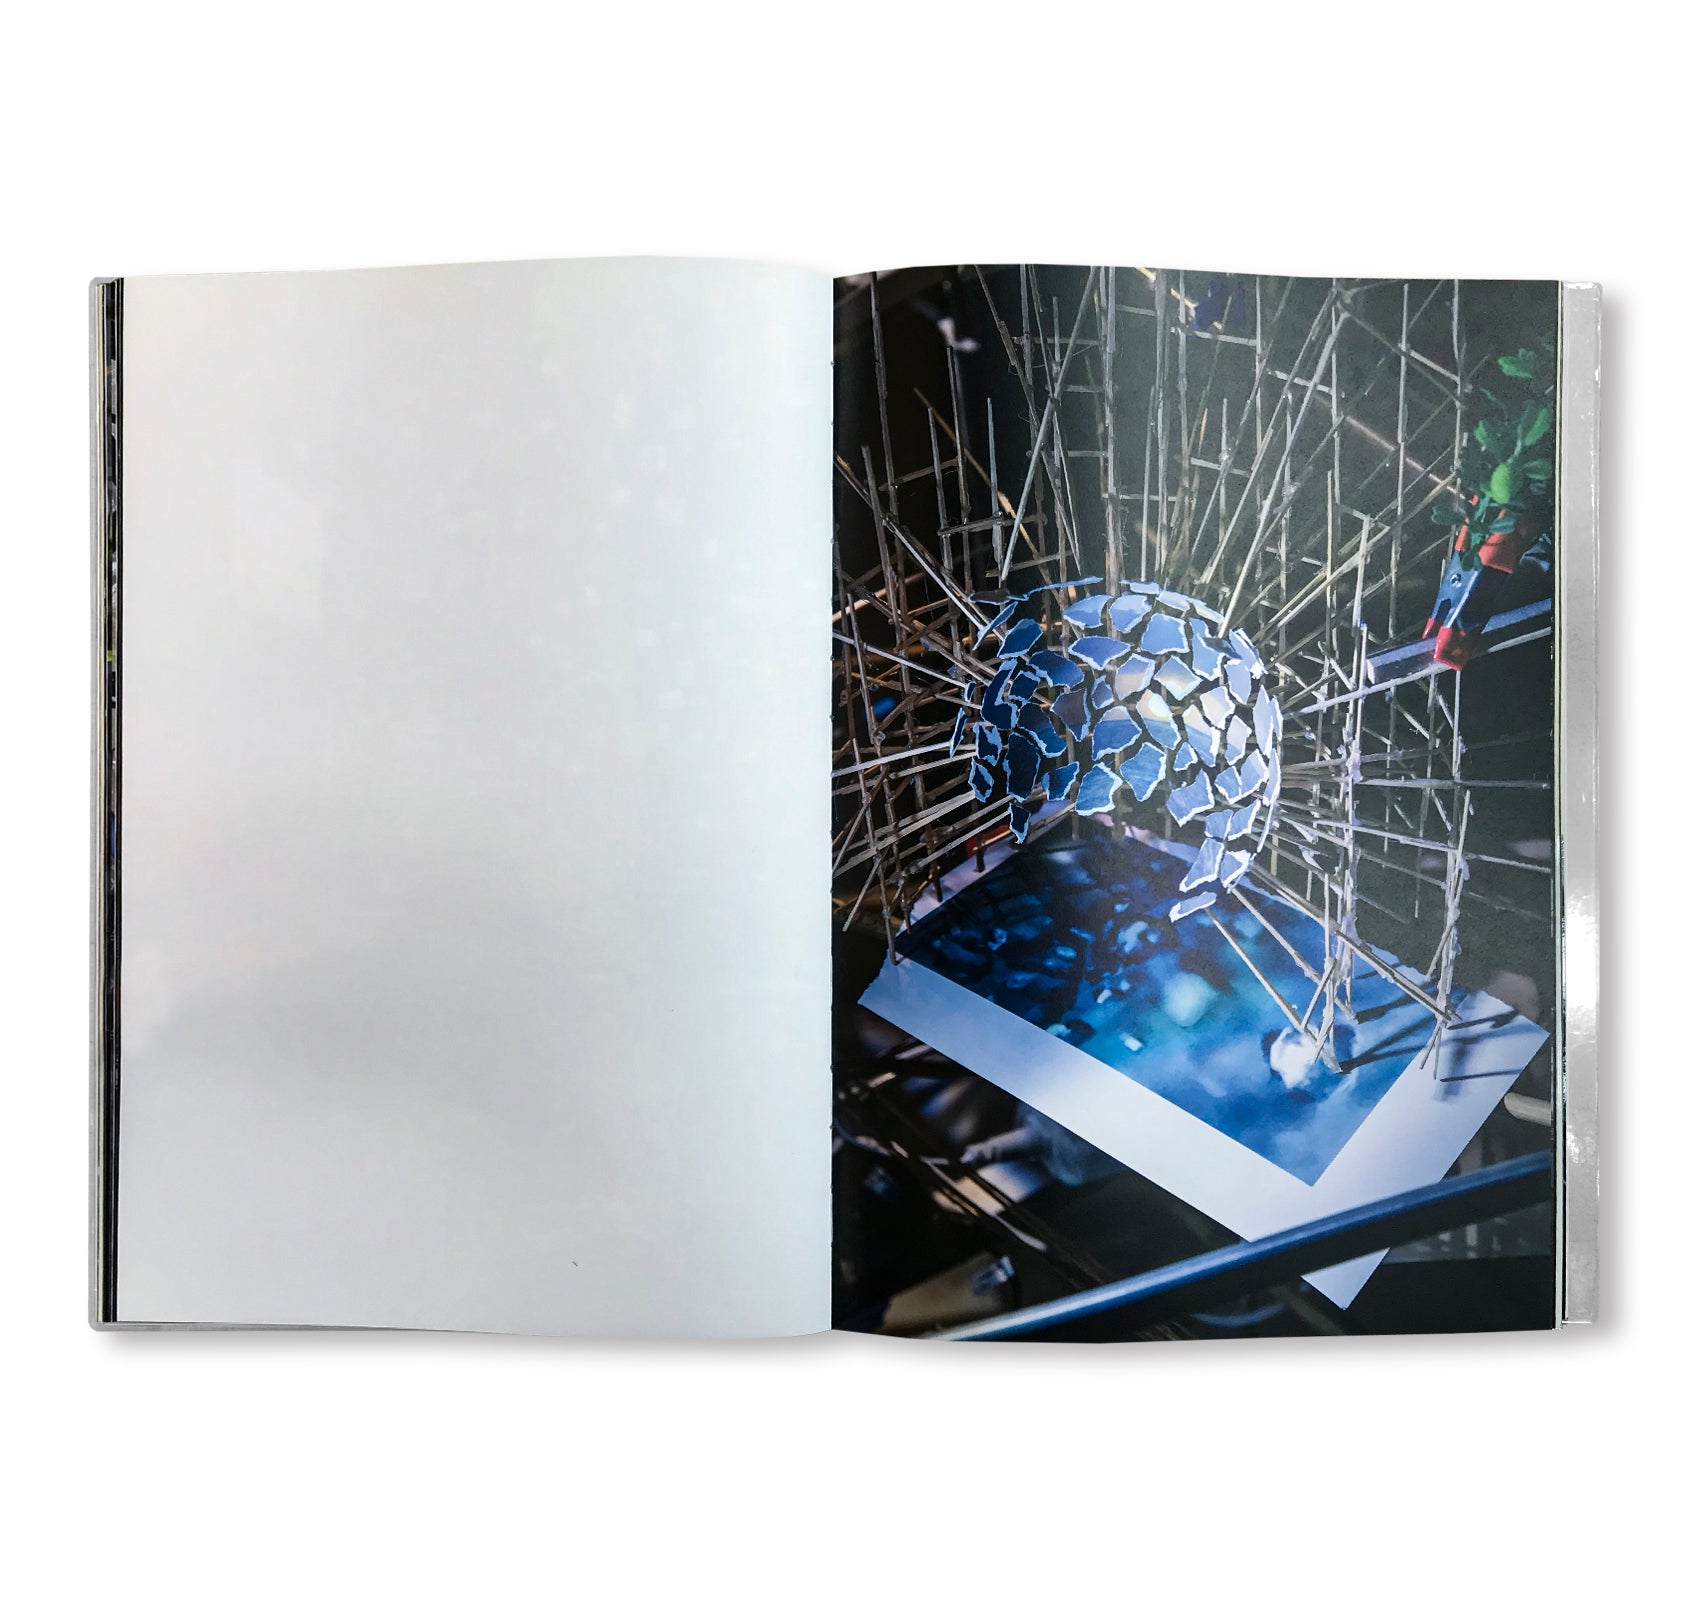 NIGHT INTO DAY by Sarah Sze